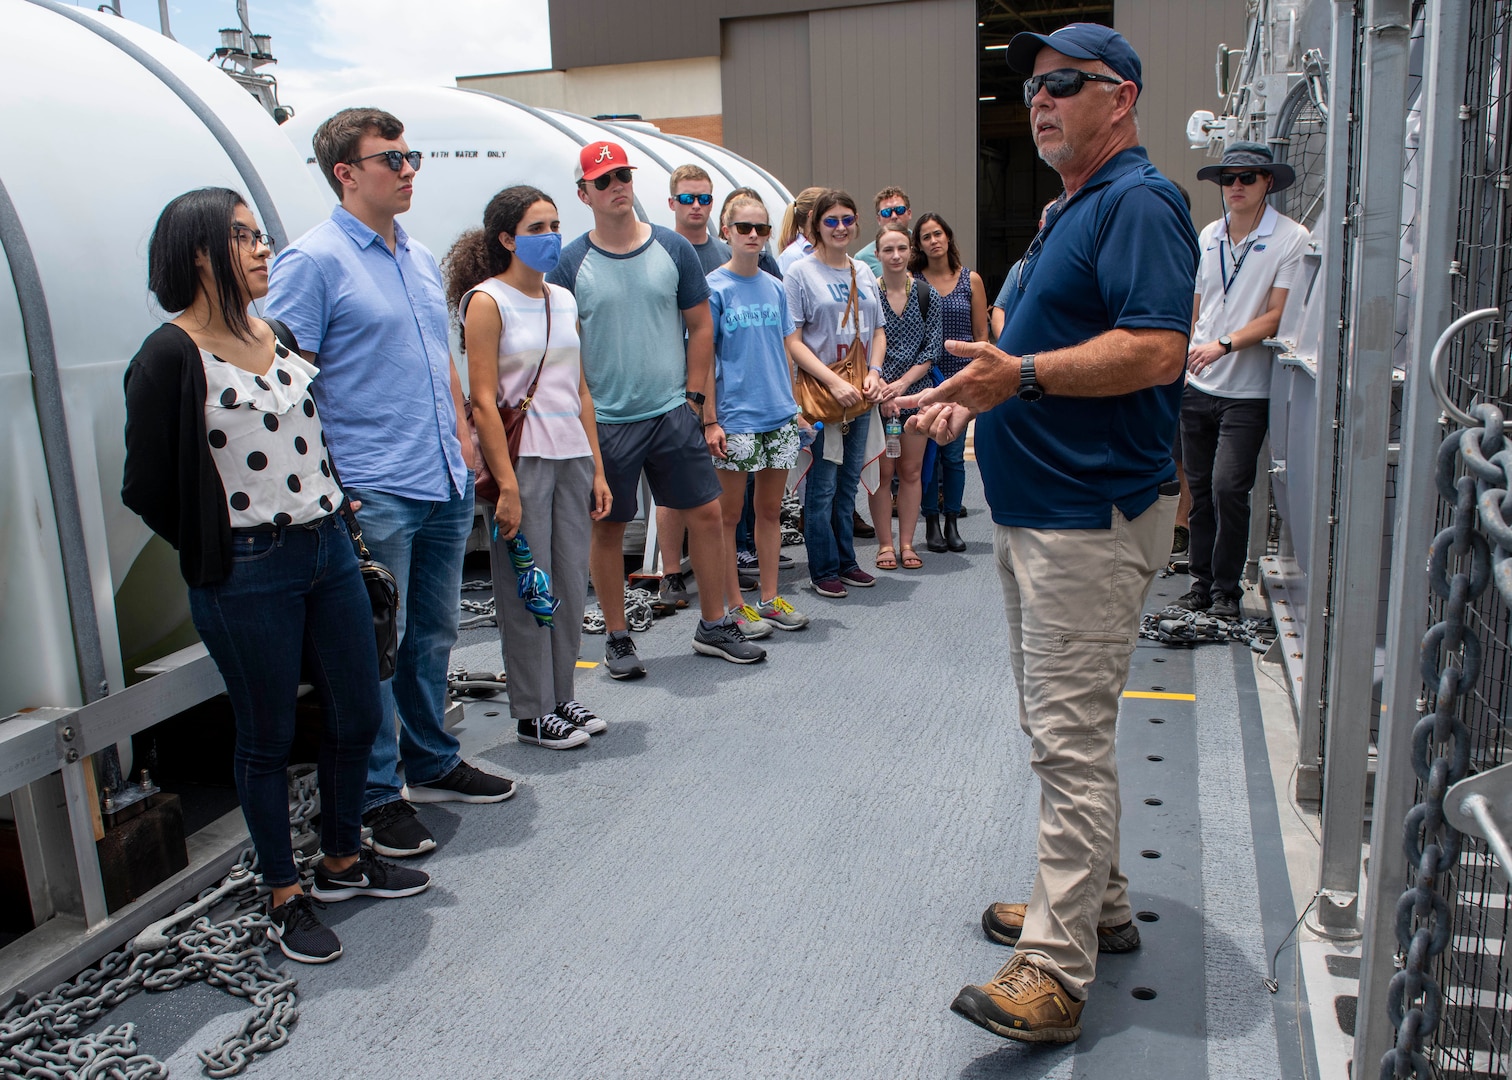 Naval Surface Warfare Center Panama City Division welcomed 18 college students for a ten-week summer internship. The Naval Research Enterprise Internship Program (NREIP) provides an opportunity for college students to participate in research at a Department of Navy laboratory during the summer.